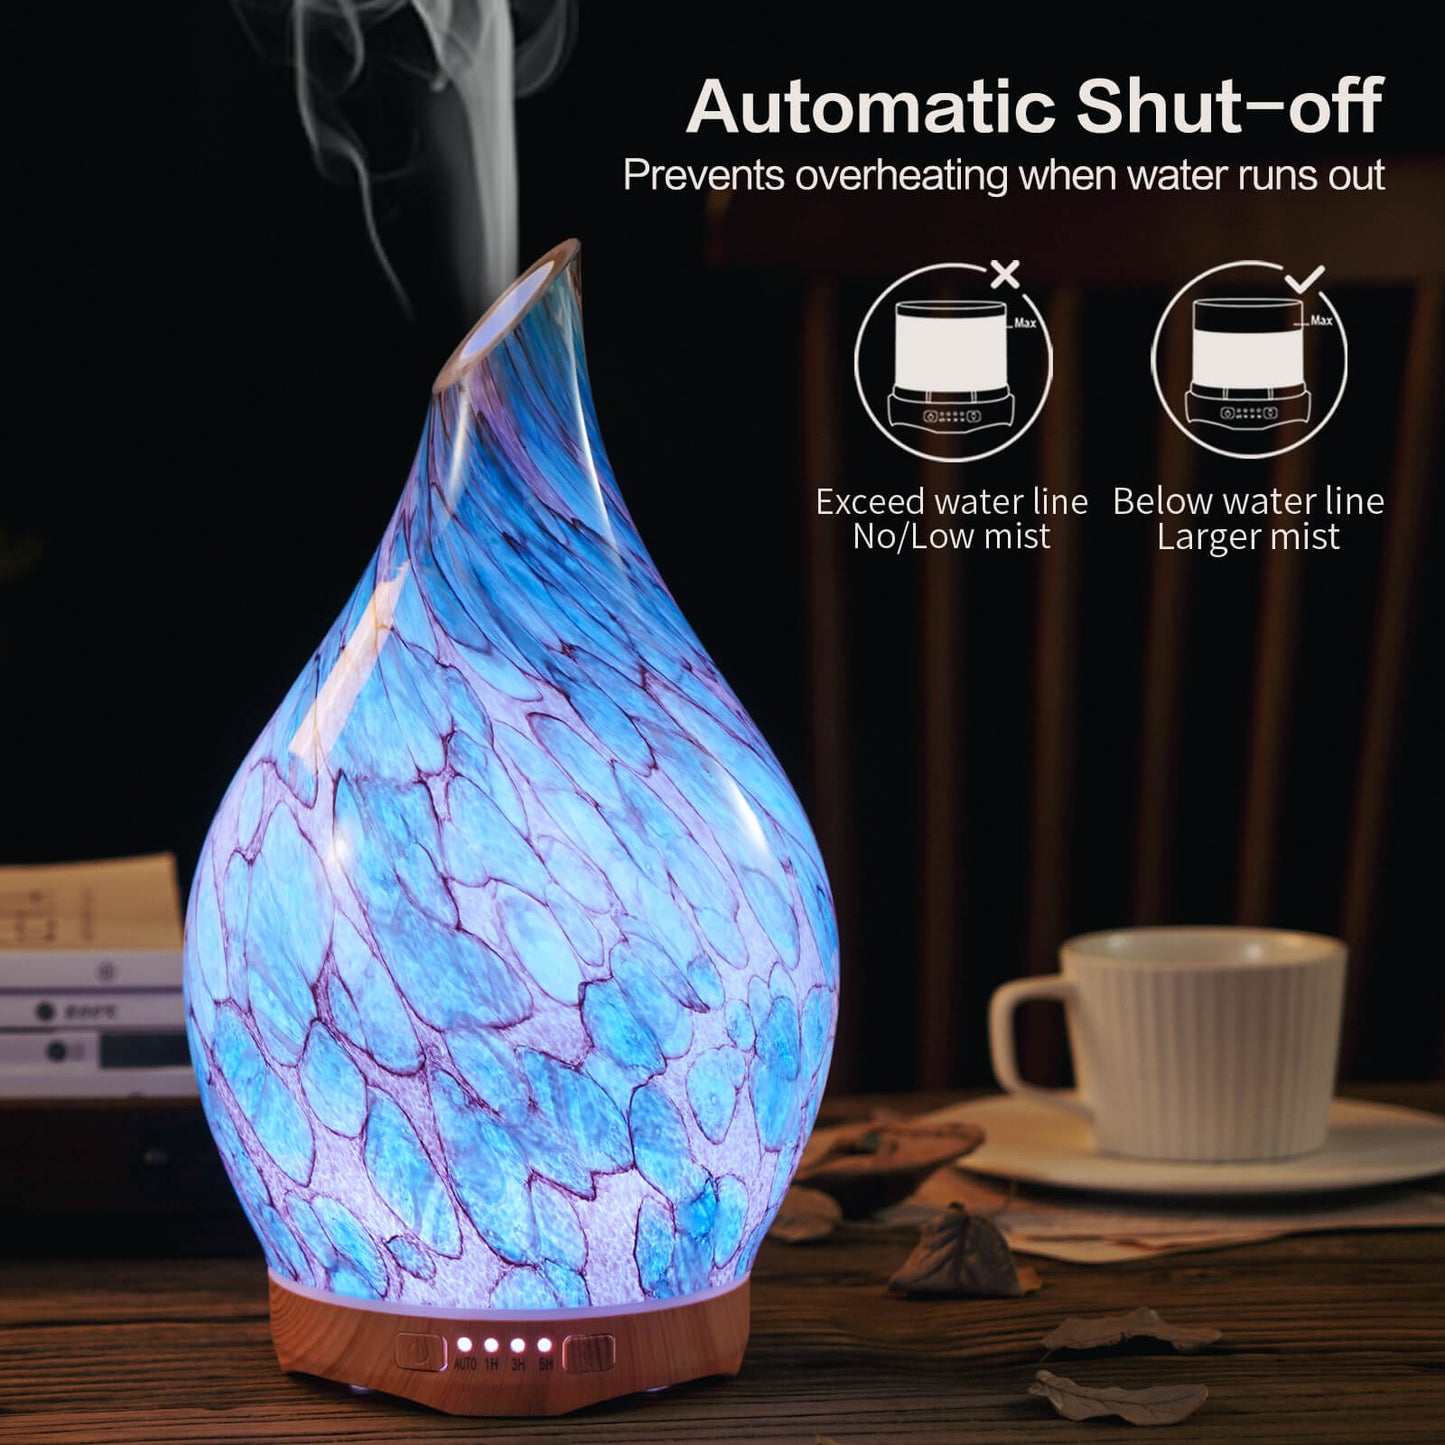 Porseme 280ml Essential Oil Diffuser Glass Color Changing Aroma Air Diffusers Aromatherapy Ultrasonic Cool Mist Humidifier with Remote Control 7 Running Hours Waterless Auto-Off (Light Blue)